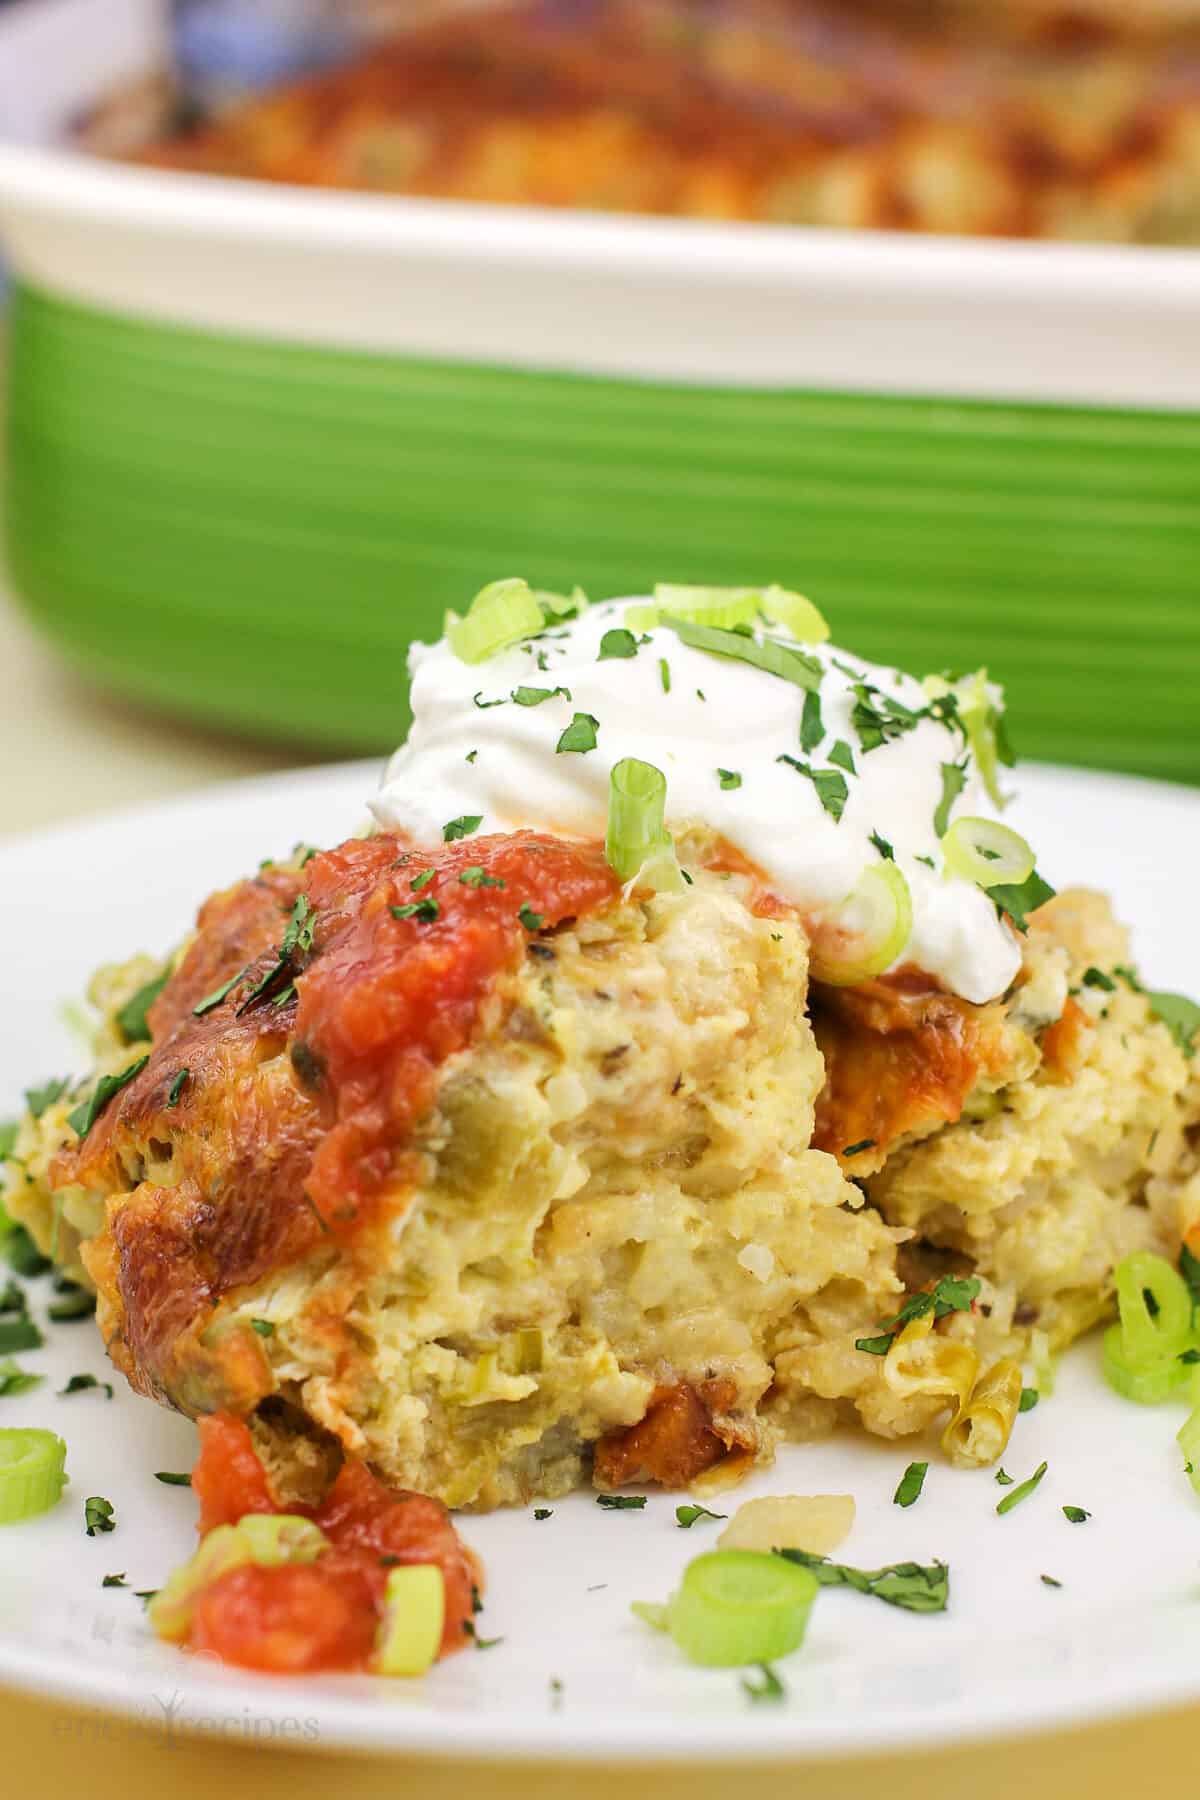 green chile egg bake on white plate topped with garnish; green casserole dish in background